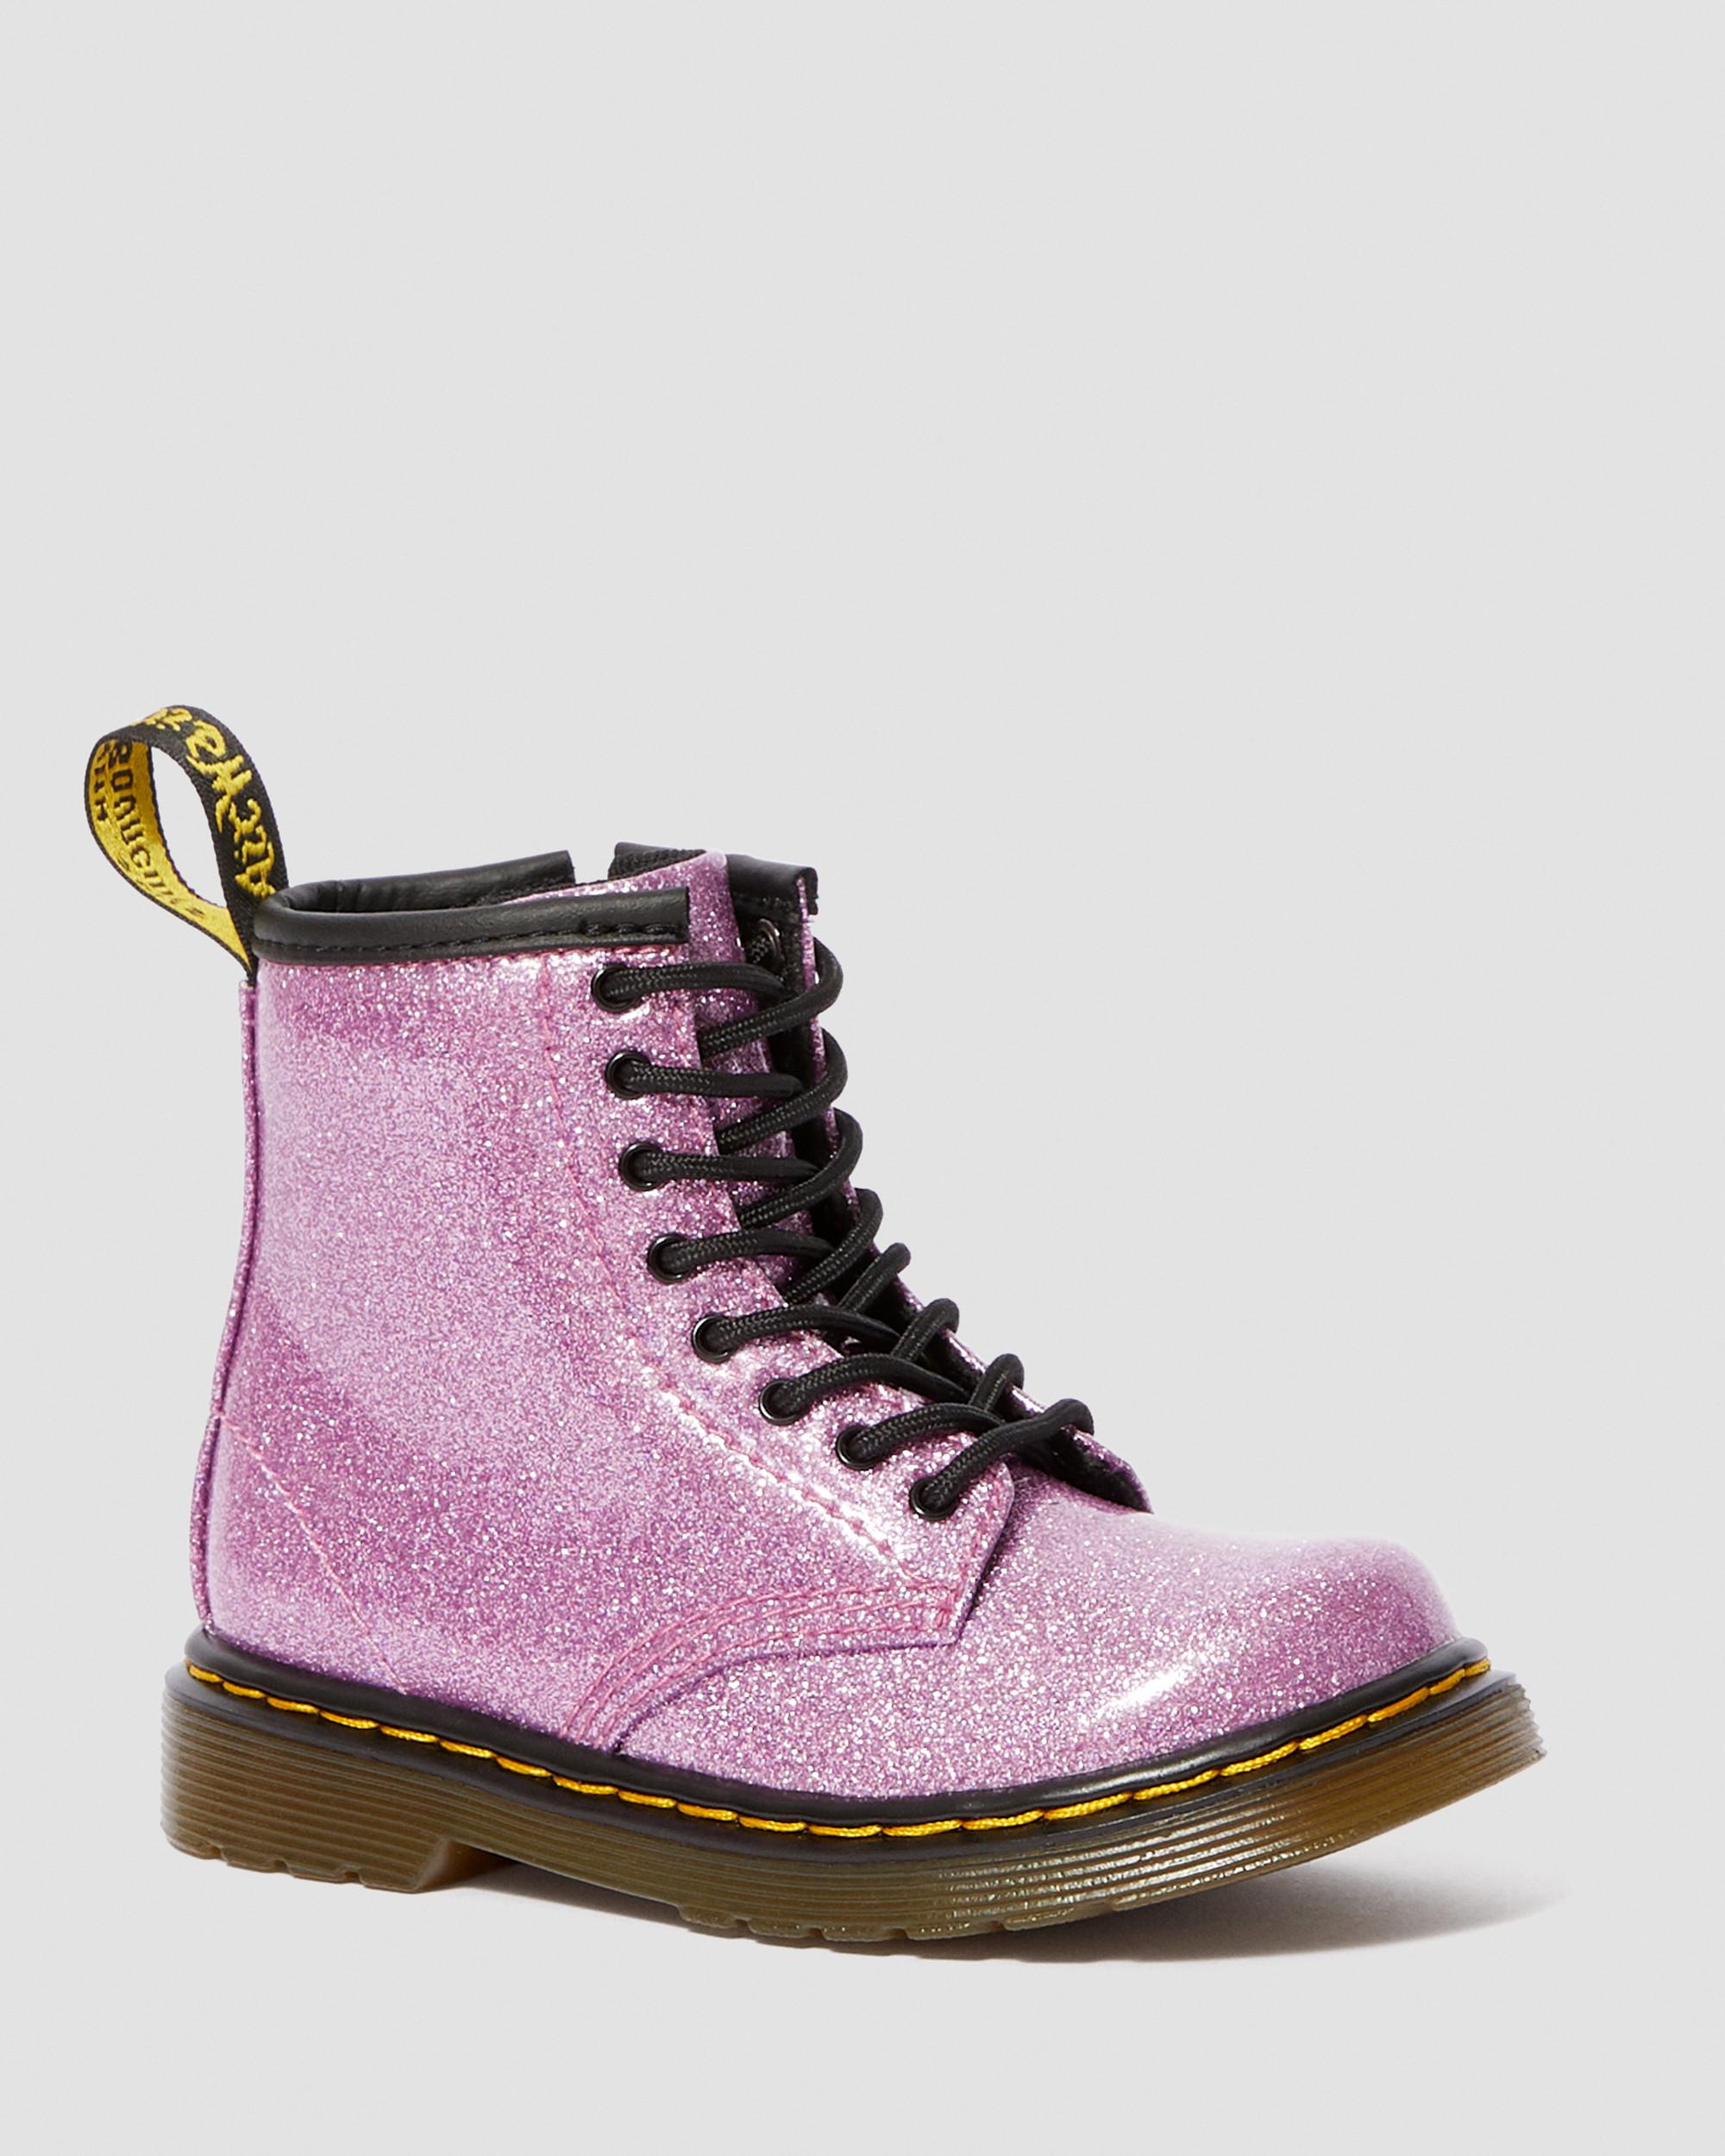 Dr. Martens' Babies' Toddler 1460 Glitter Lace Up Boots In Pink